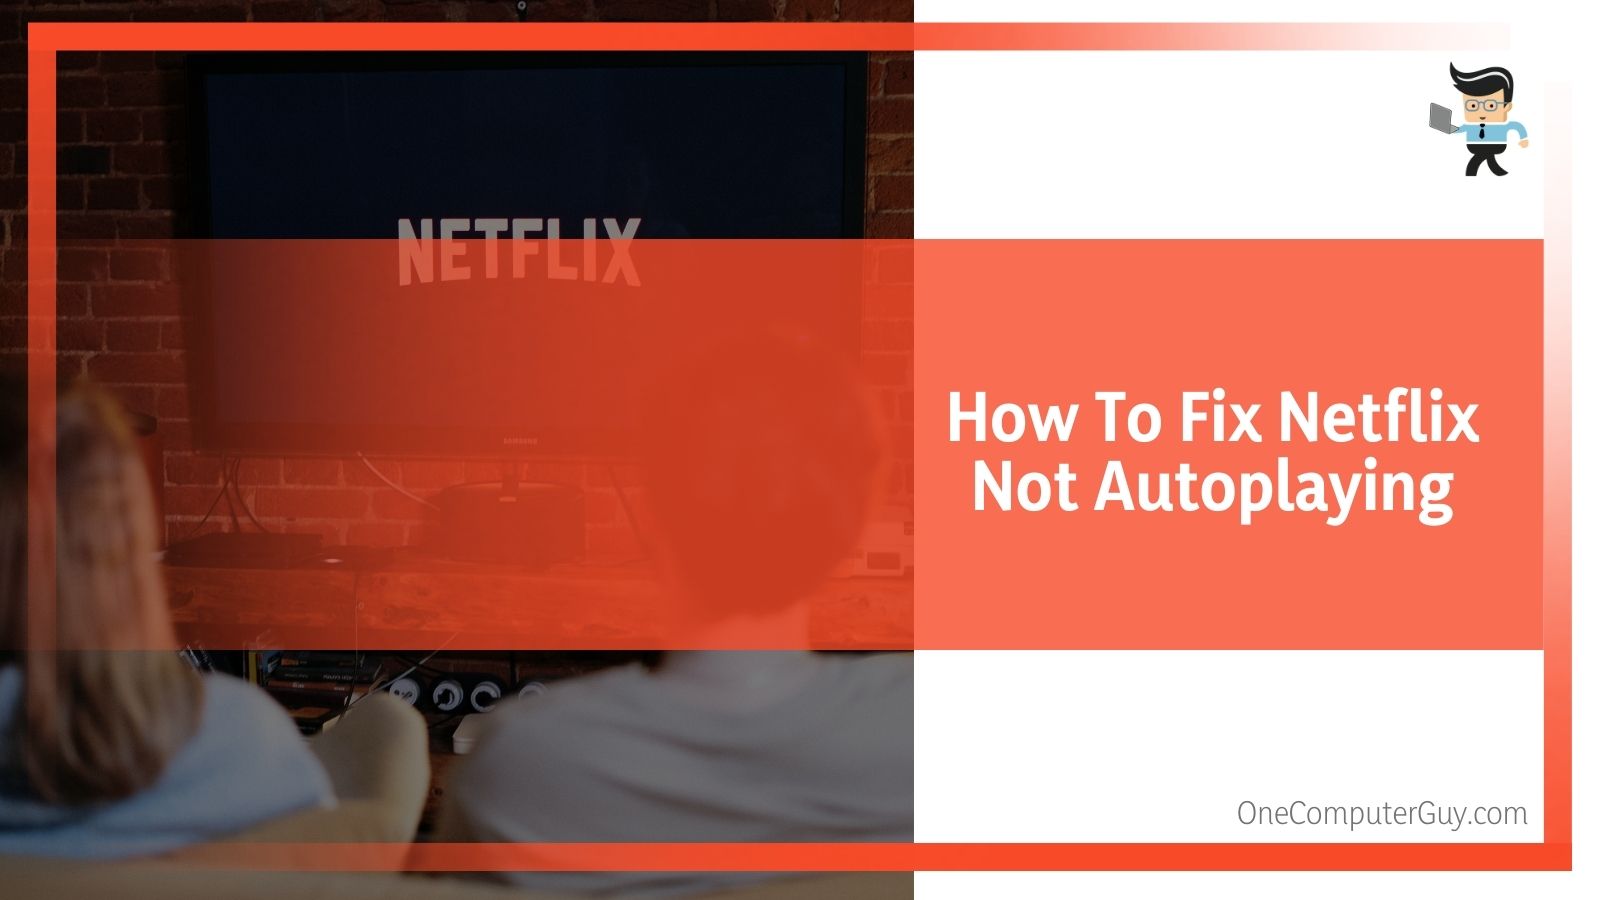 How To Fix Netflix Not Autoplaying